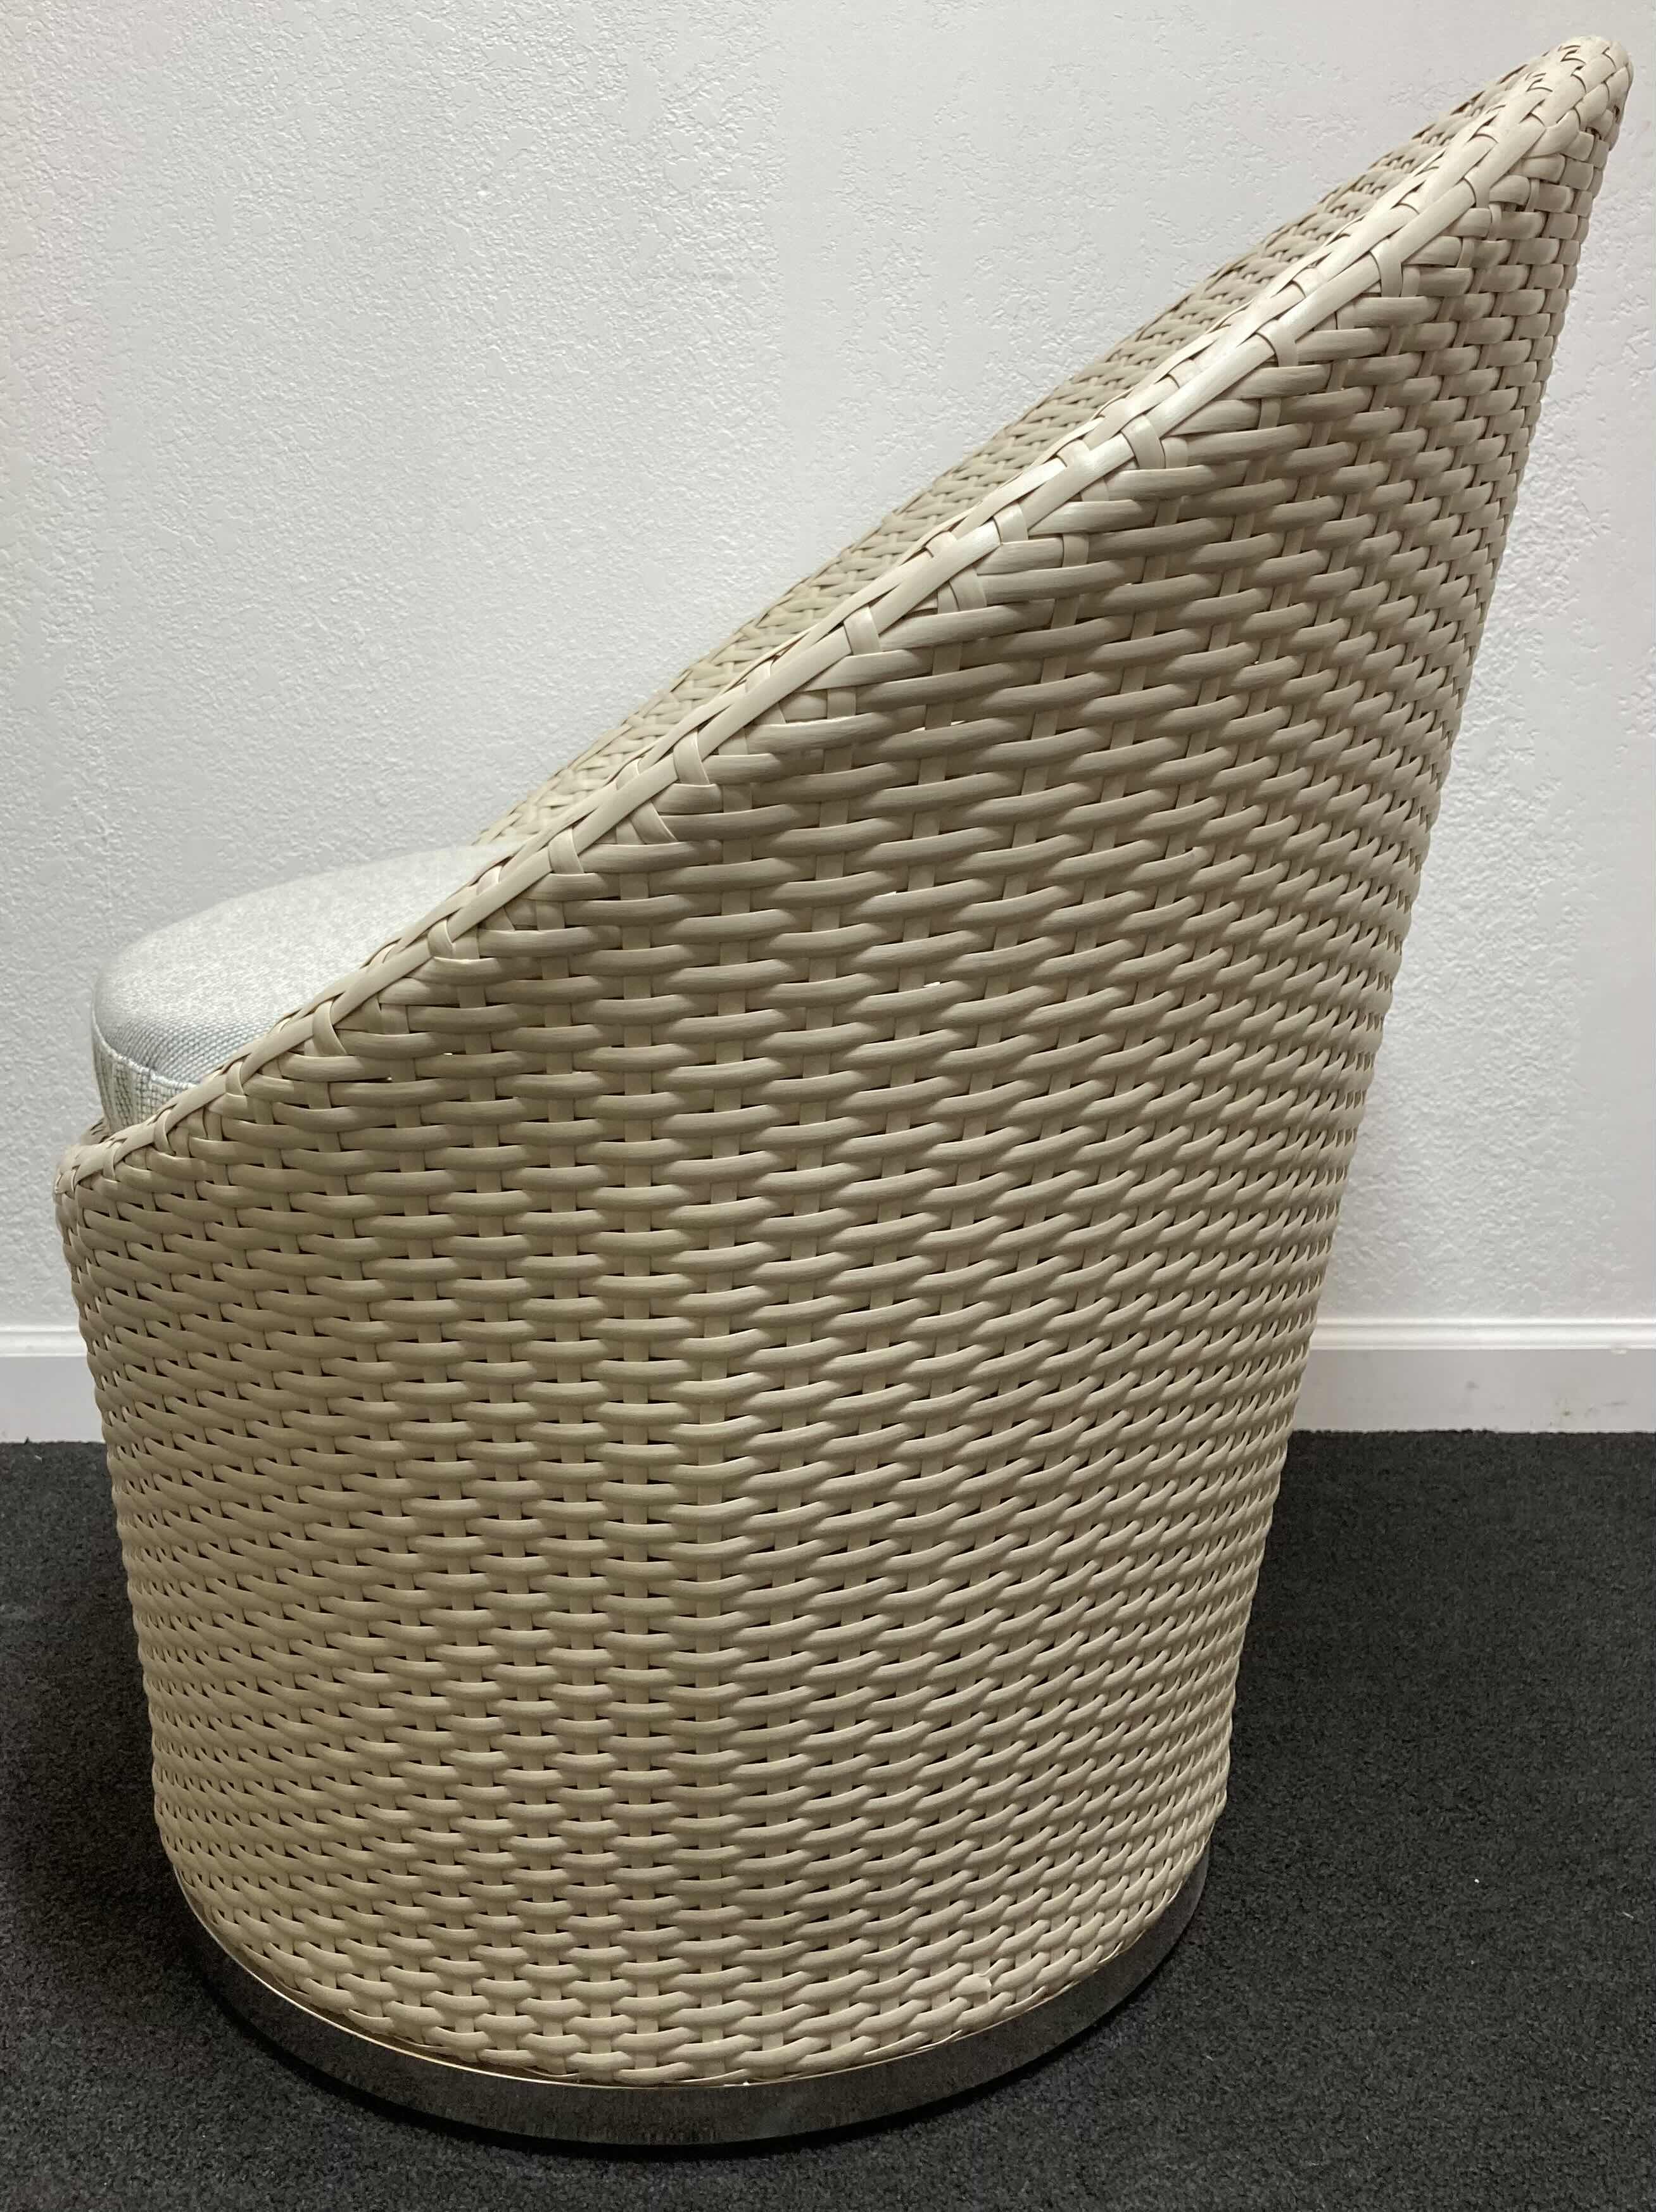 Photo 5 of SILHOUETTE OUTDOOR FURNITURE OFF-WHITE LUXURY WOVEN WICKER LOUNGE CHAIR W SEAT CUSHION & CHROME FINISH BASE 33” X 24” H28.5”